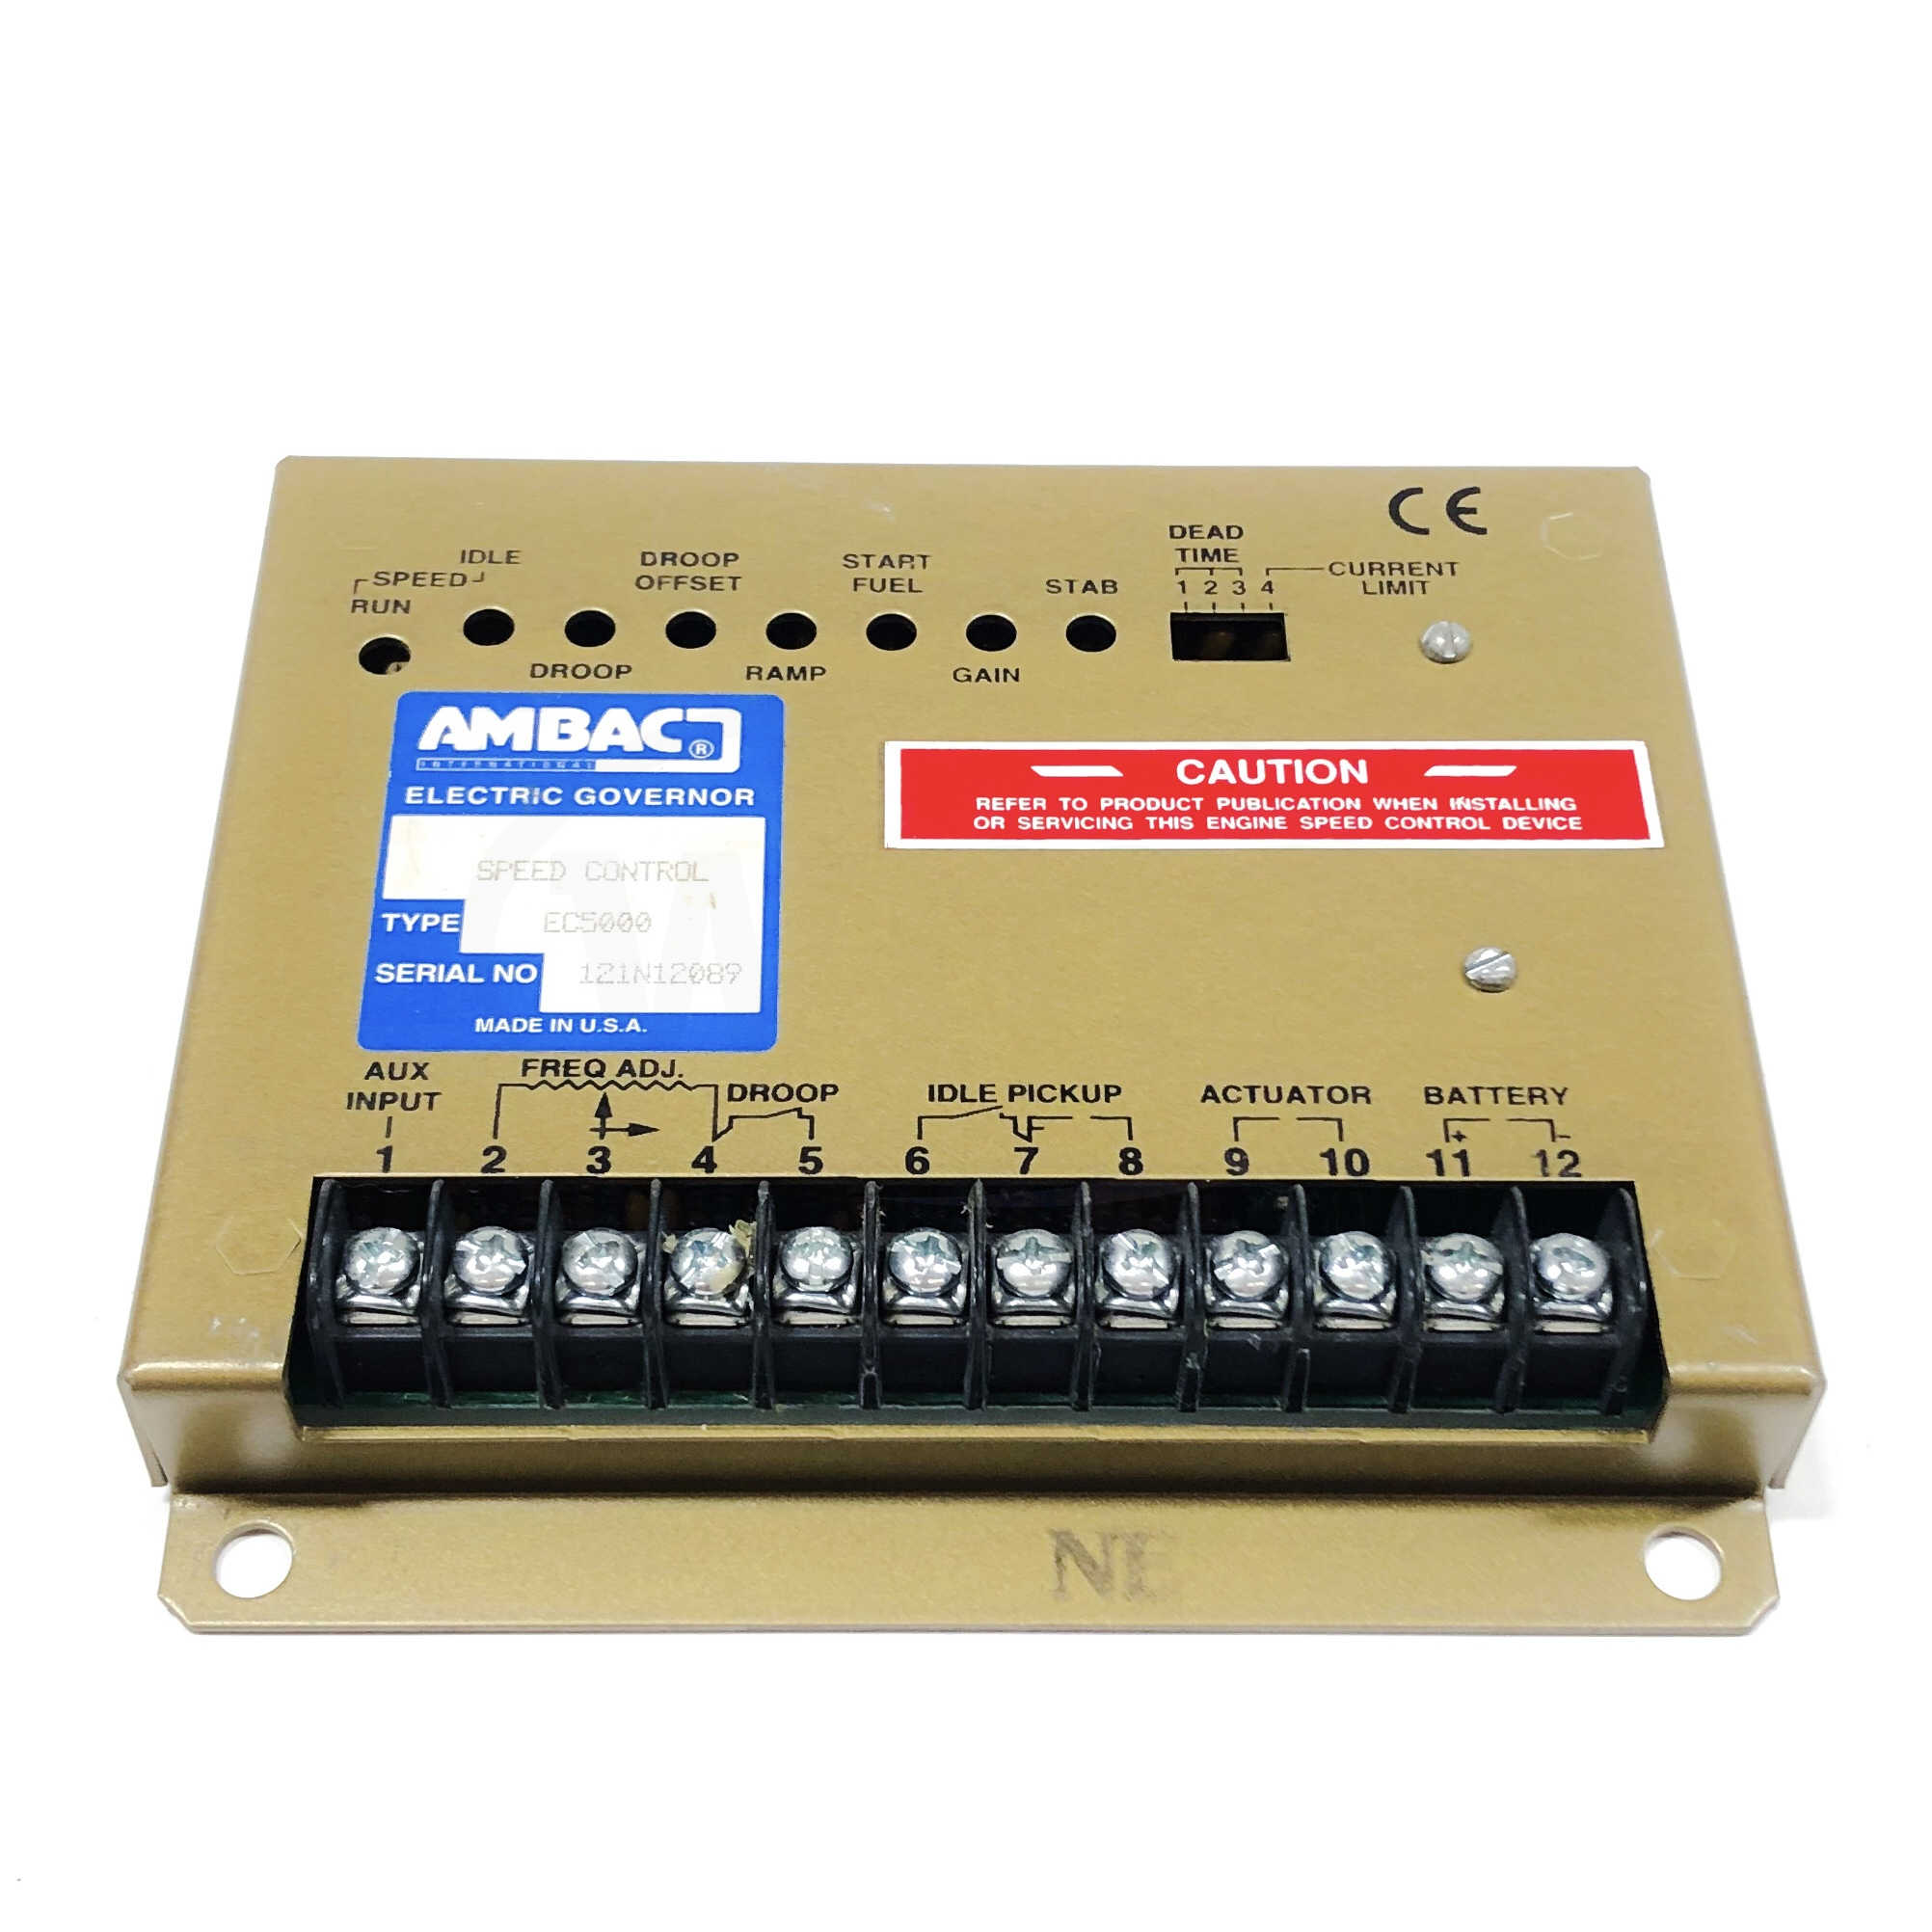 EC5000 Ambac Electric Governor Speed Control 1